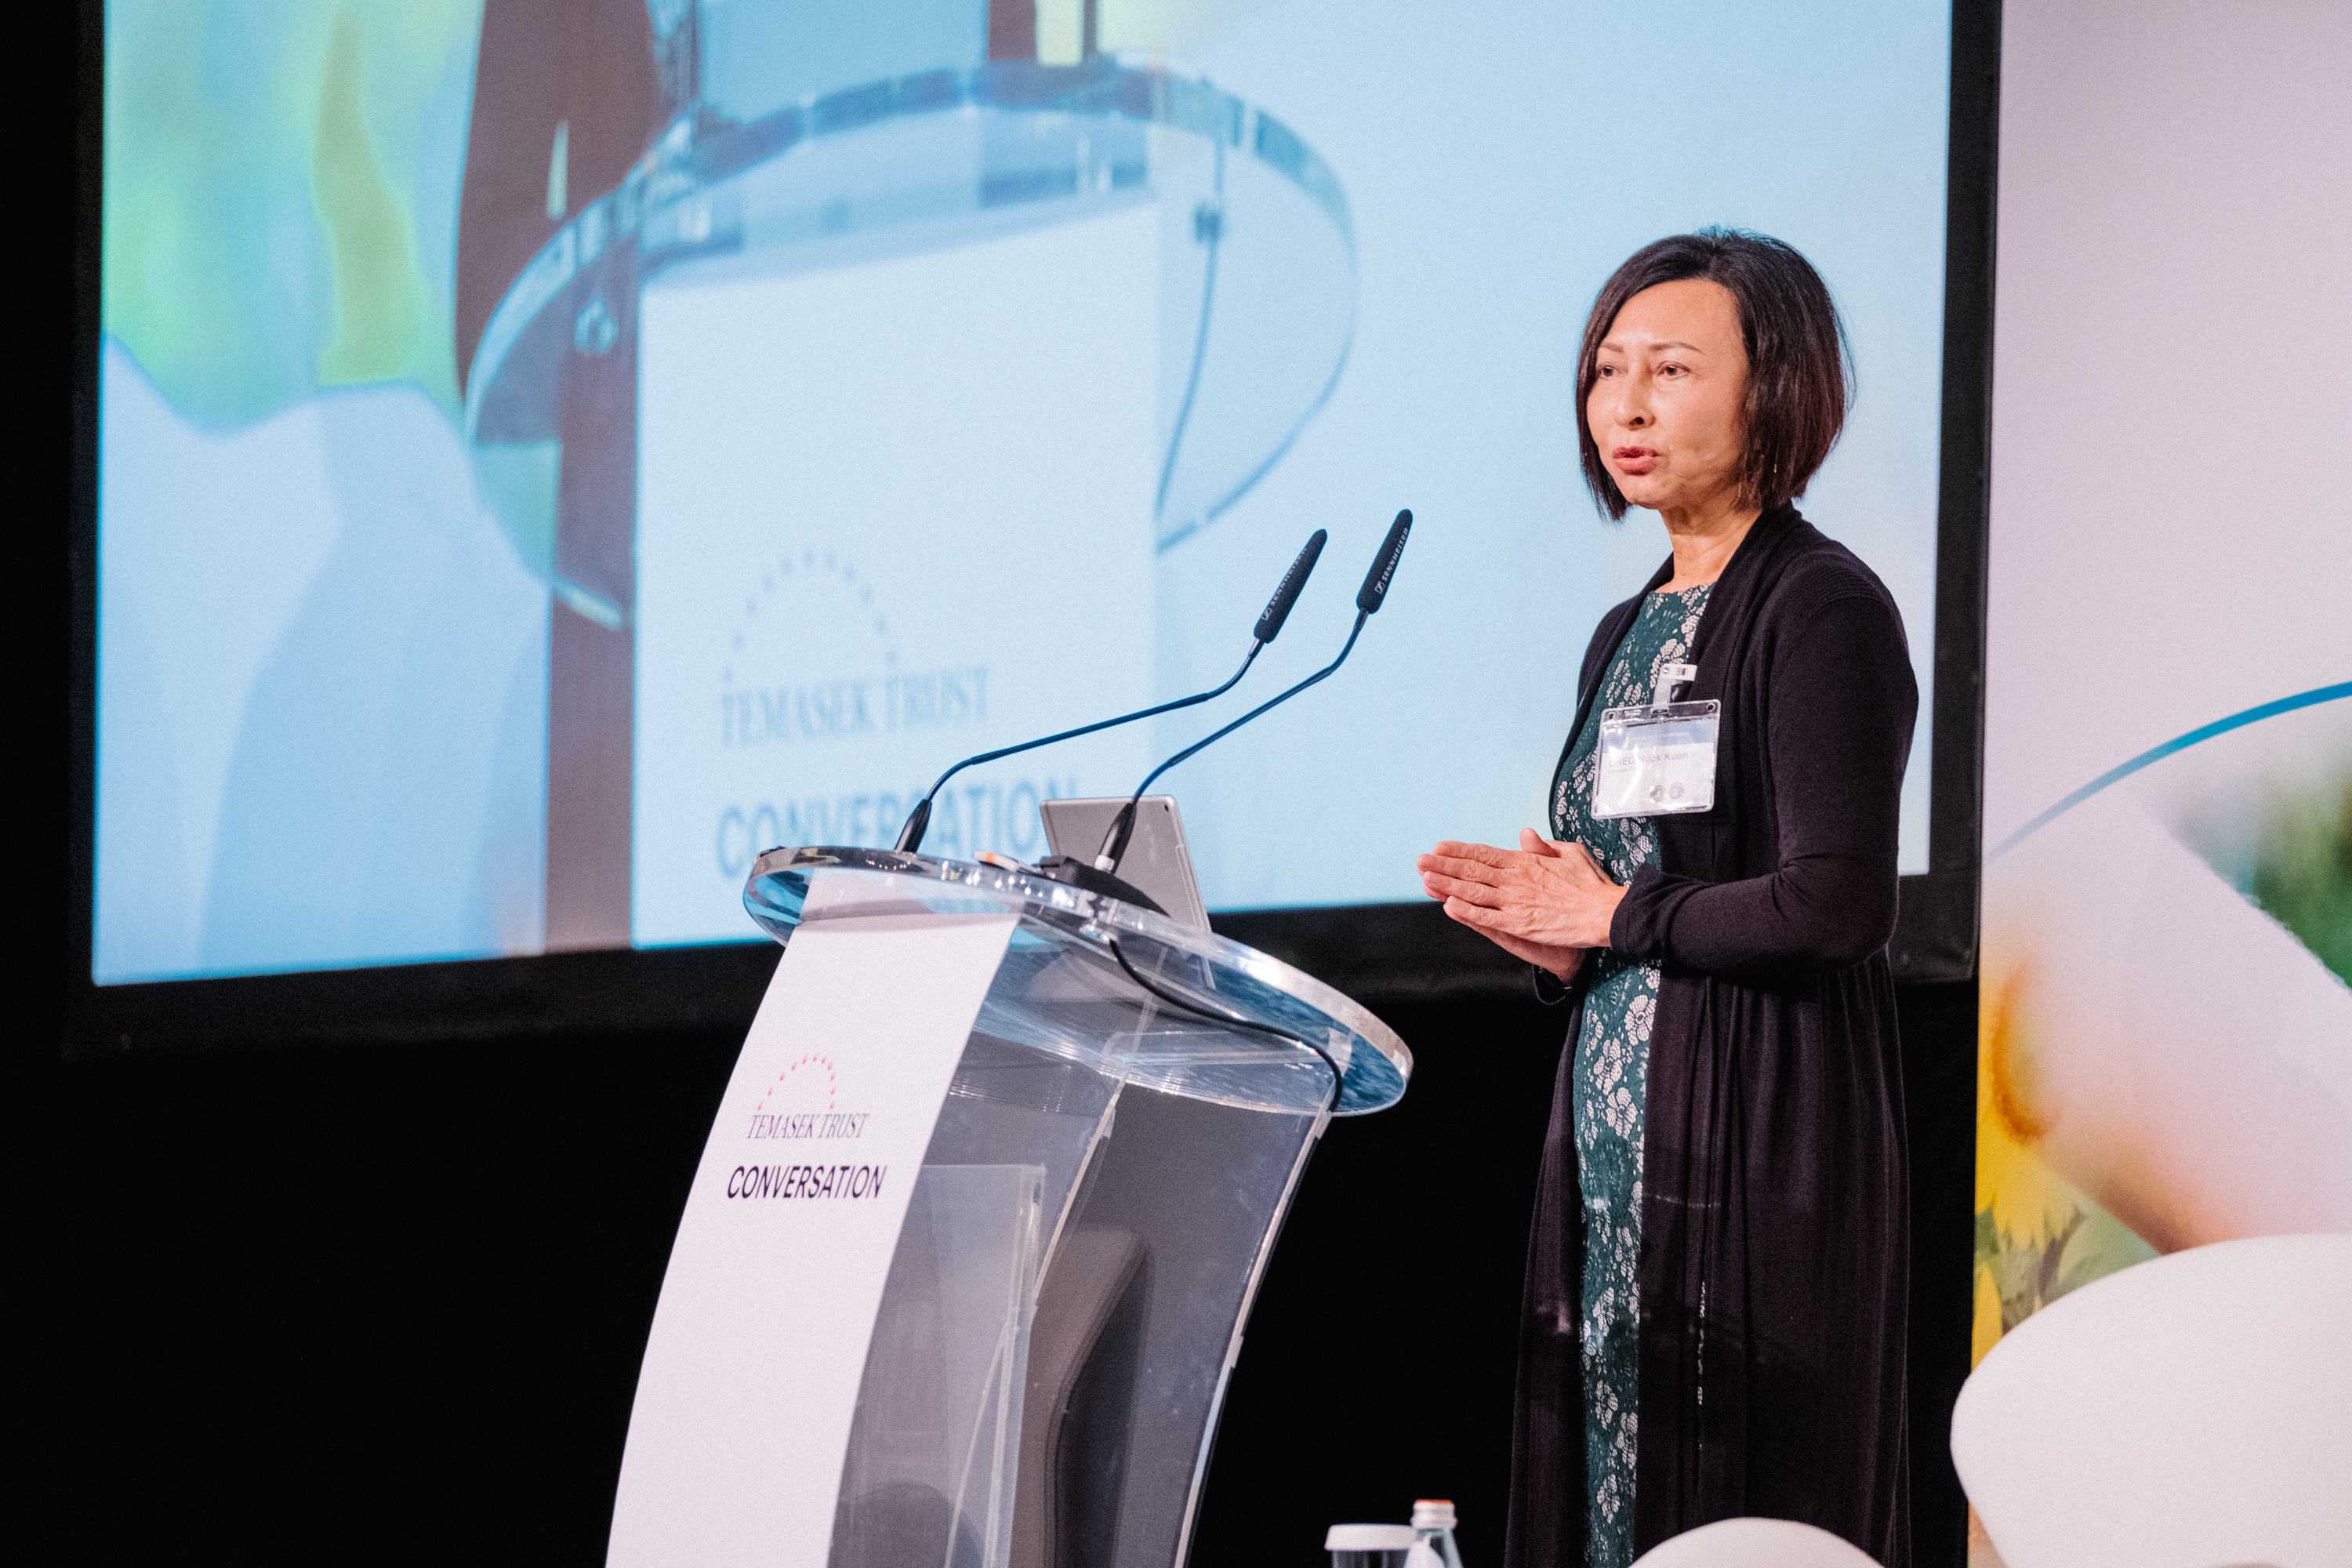 Transcript: Welcome Remarks by Ms Cheo Hock Kuan at Temasek Trust Conversation 2019: New Pathways of Philanthropy